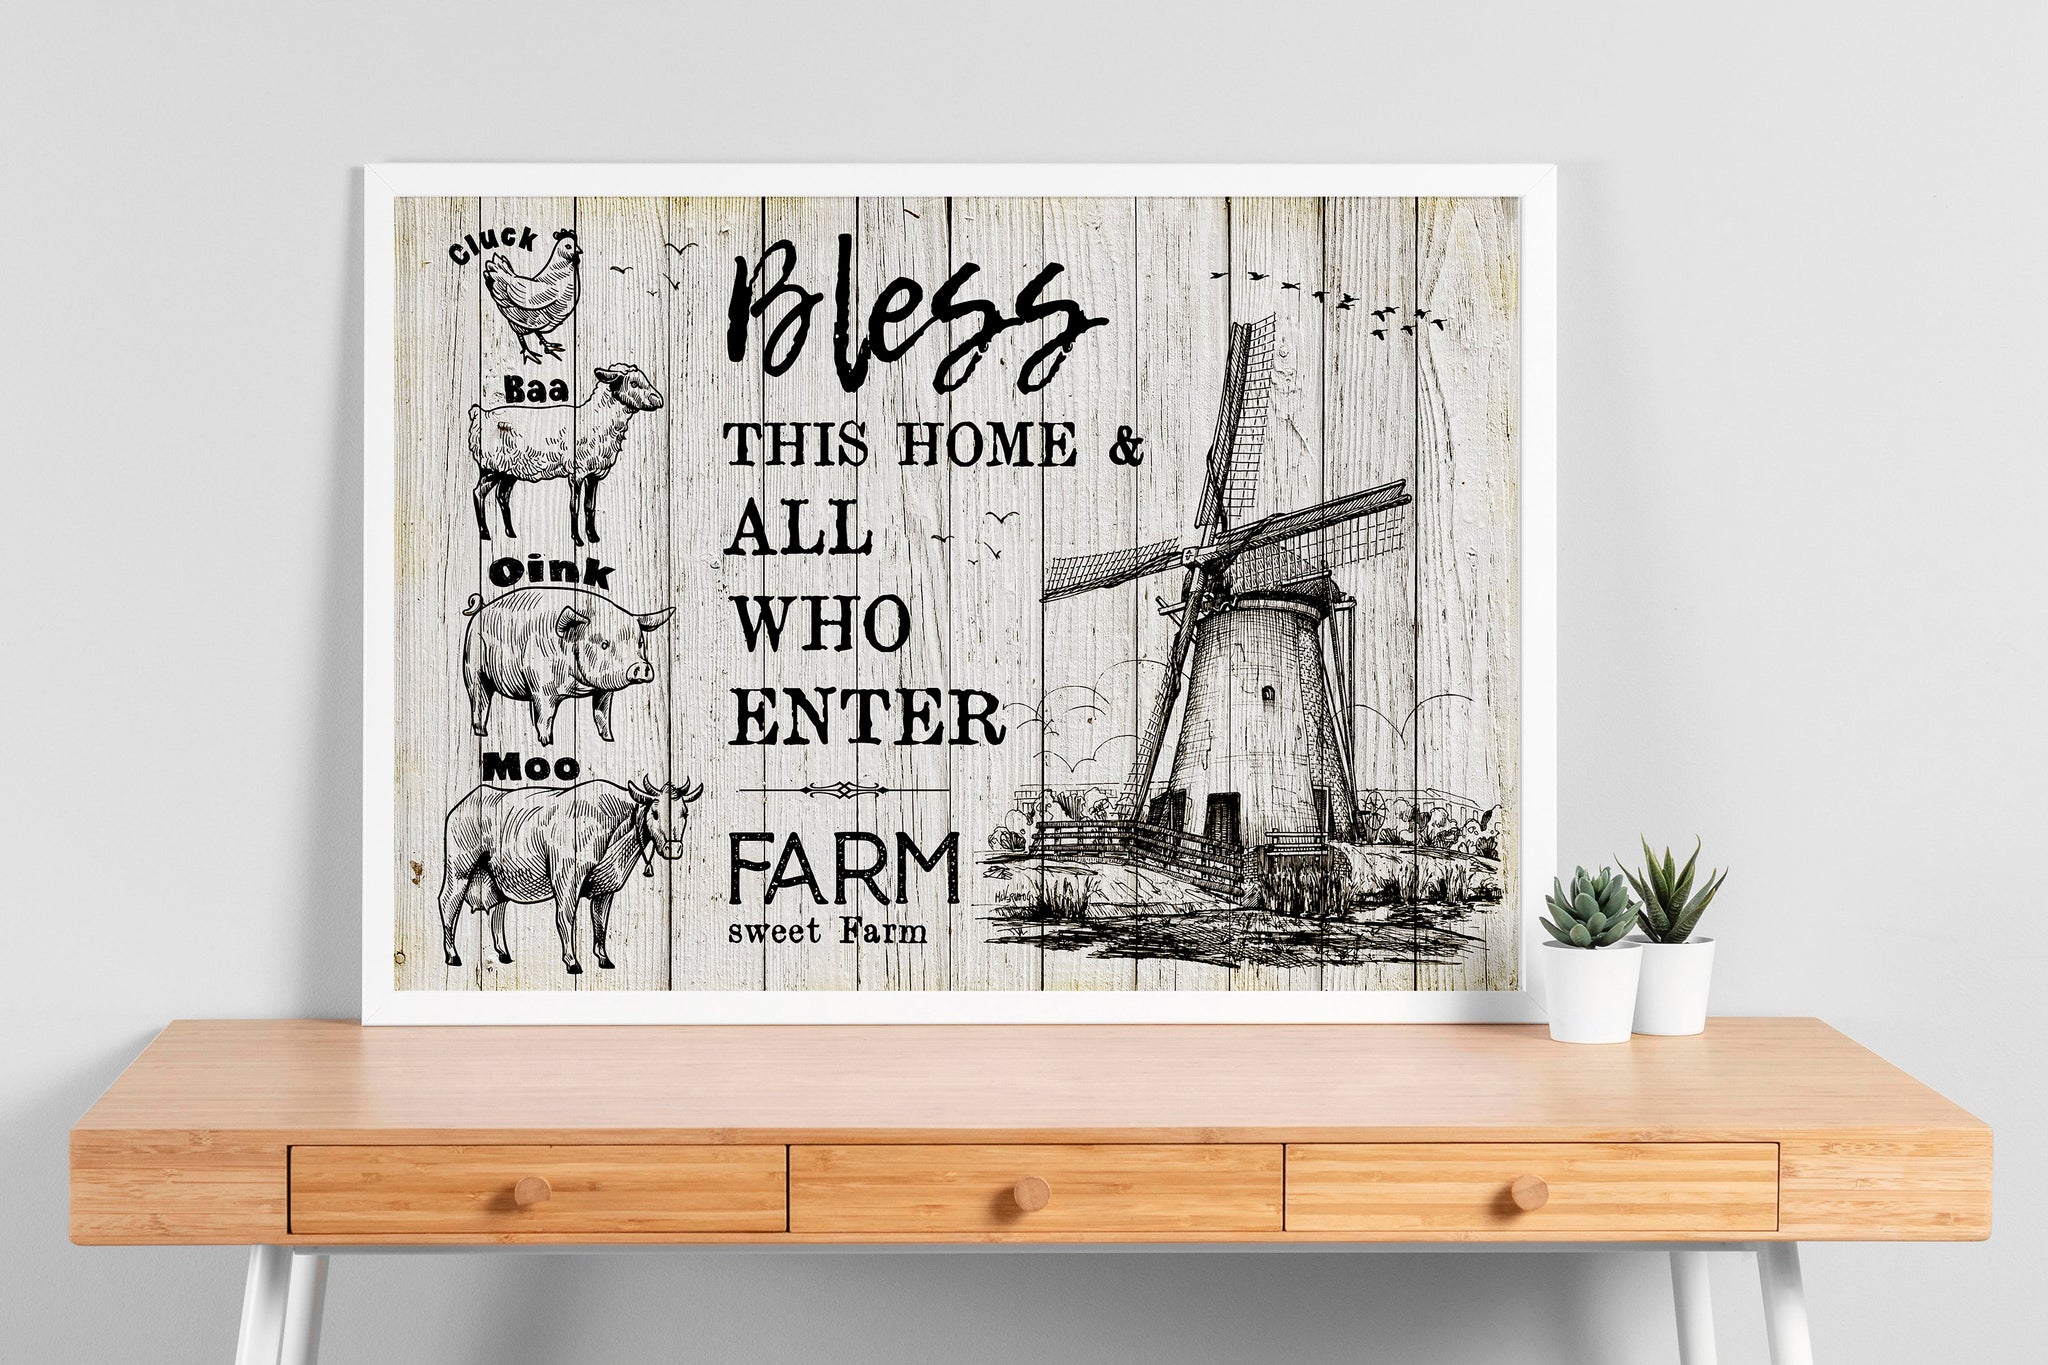 Beautiful Bless This Home And All Who Enter Poster With Mindwill And Farm Animals